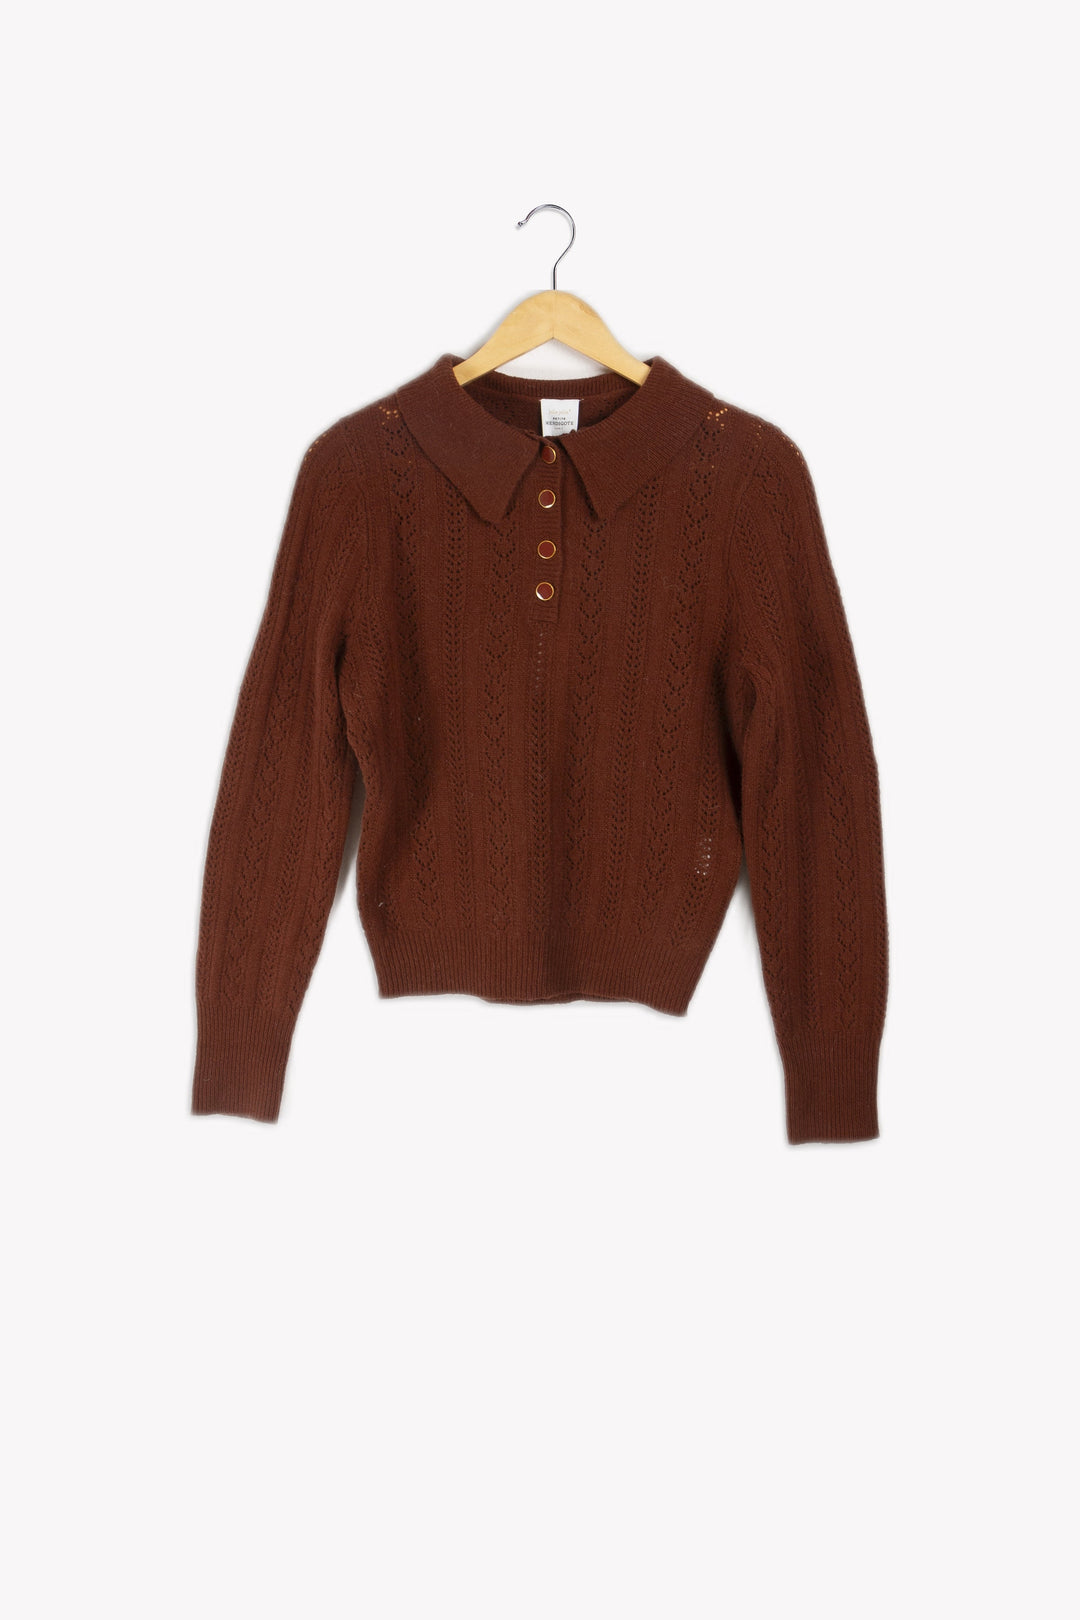 Brown Sweater - S